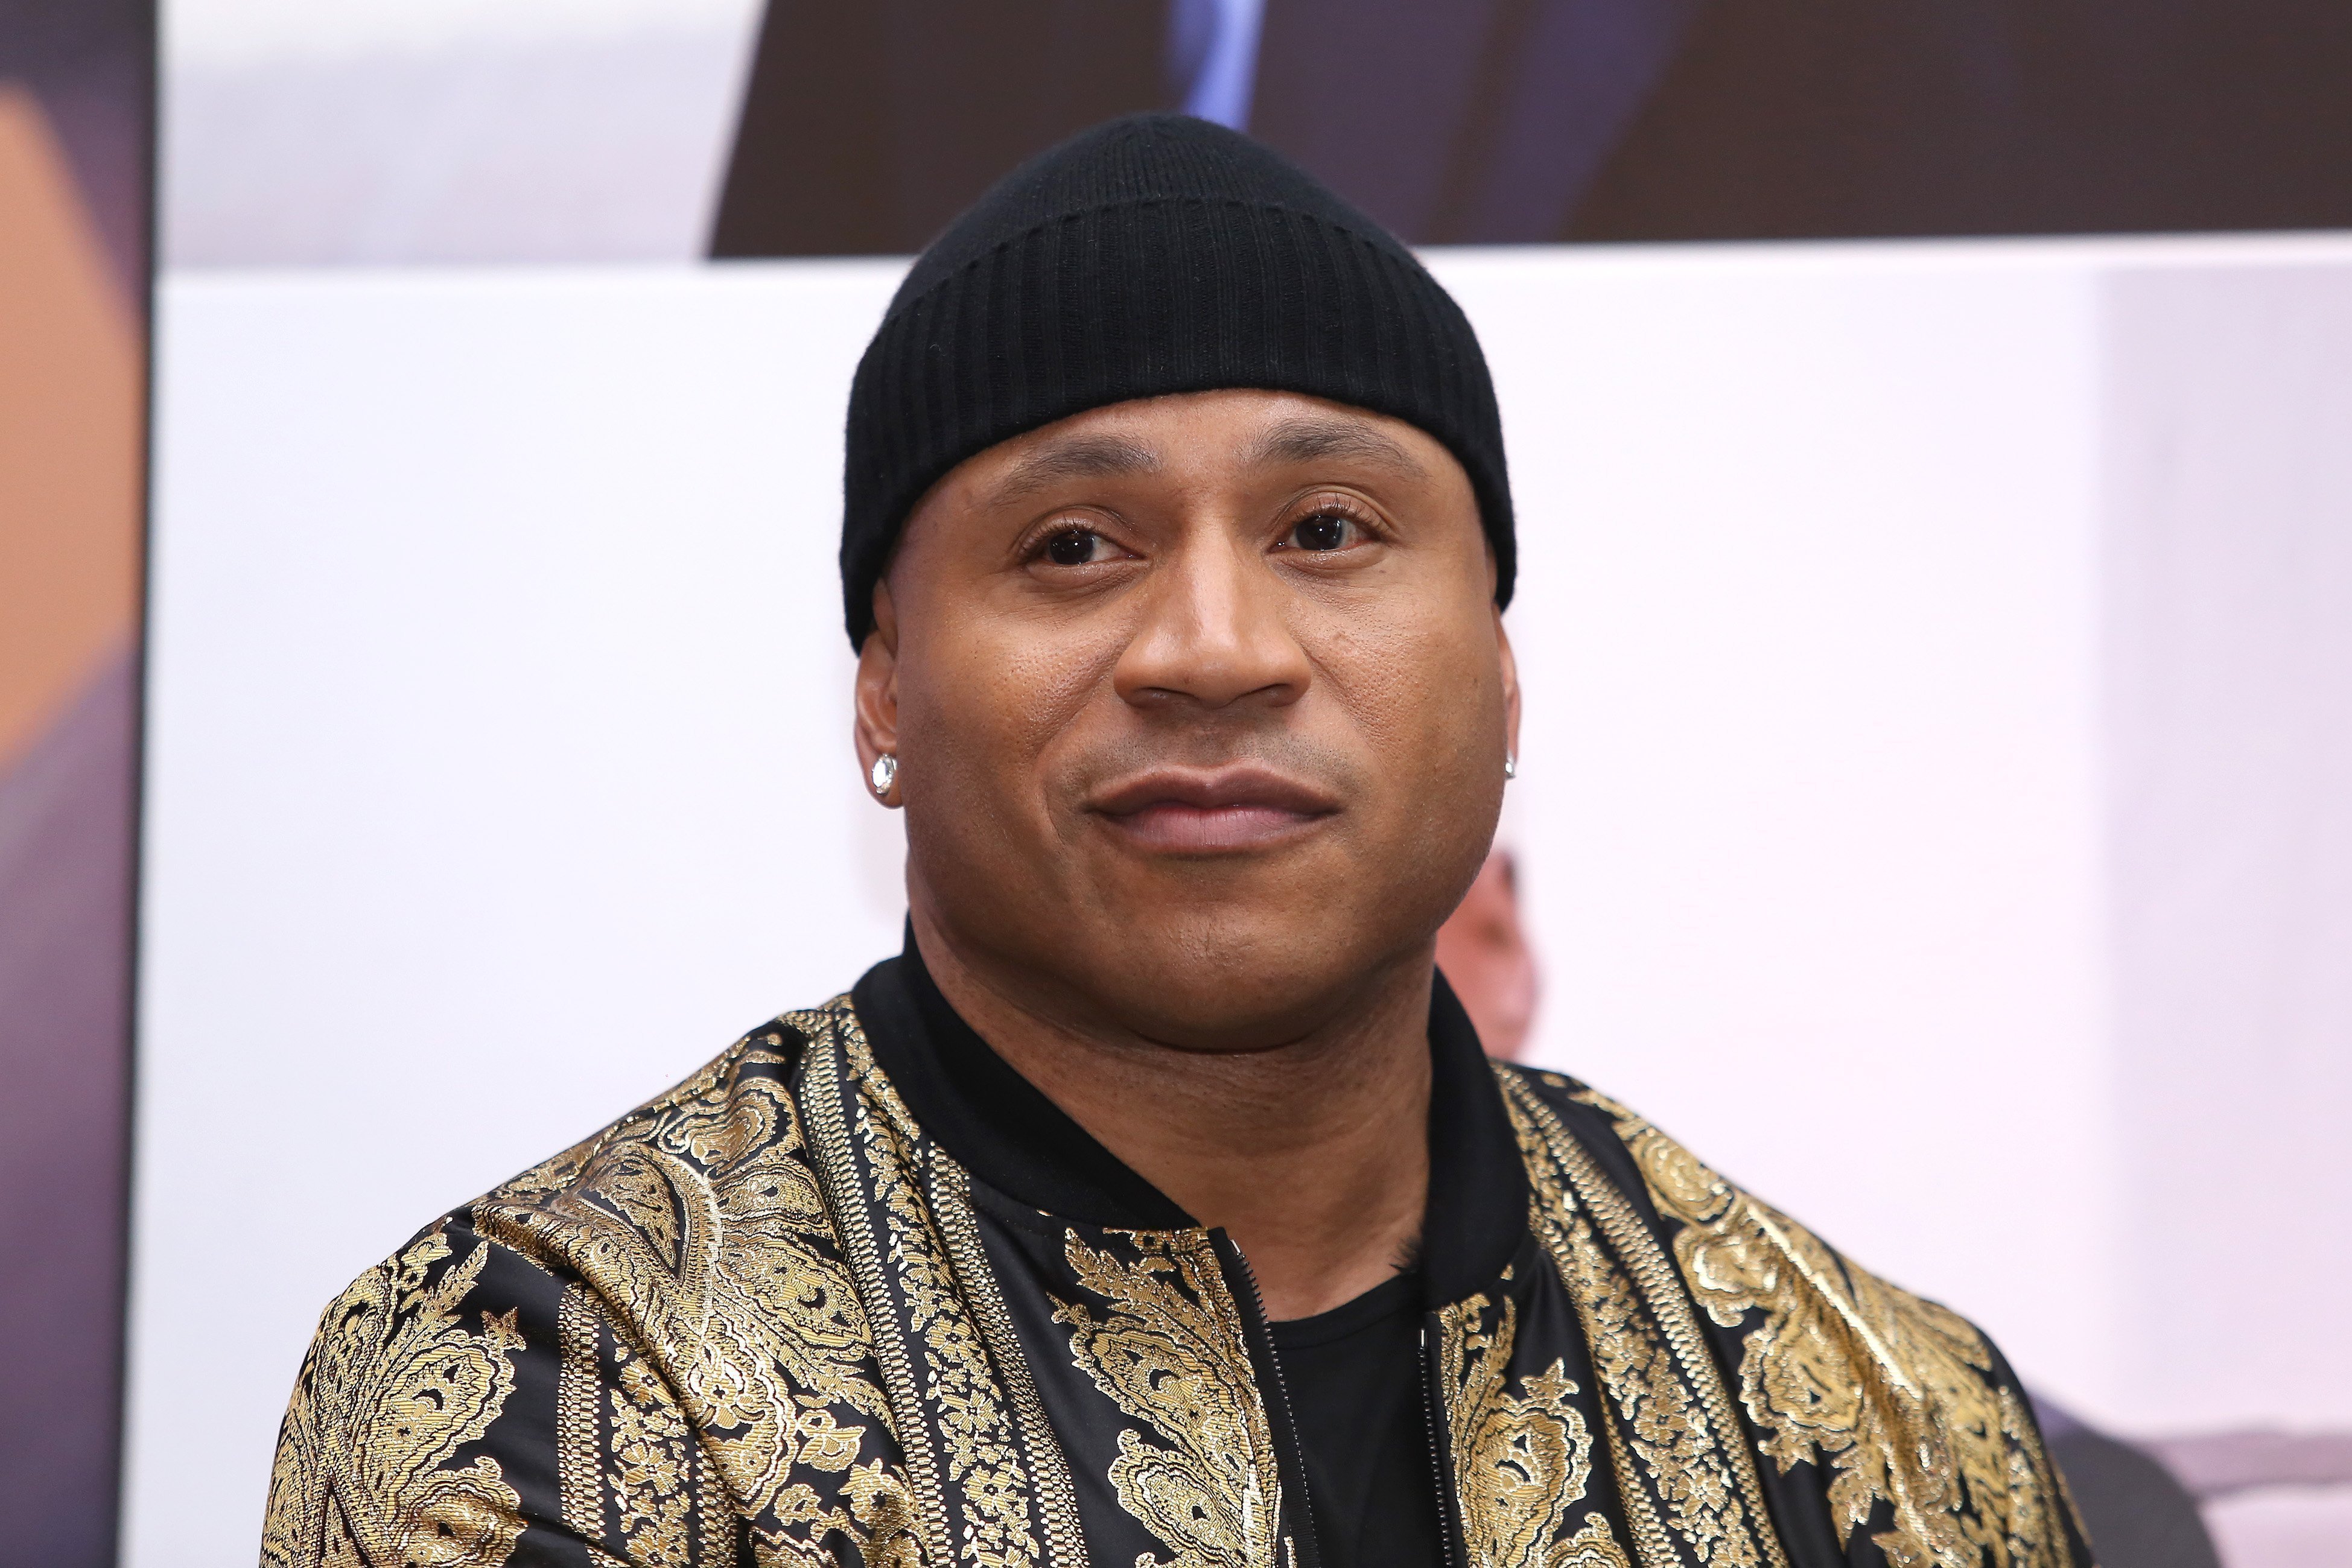 LL Cool J during a press conference at Hotel St. Regis on June 5, 2019 | Source: Getty Images/GlobalImagesUkraine